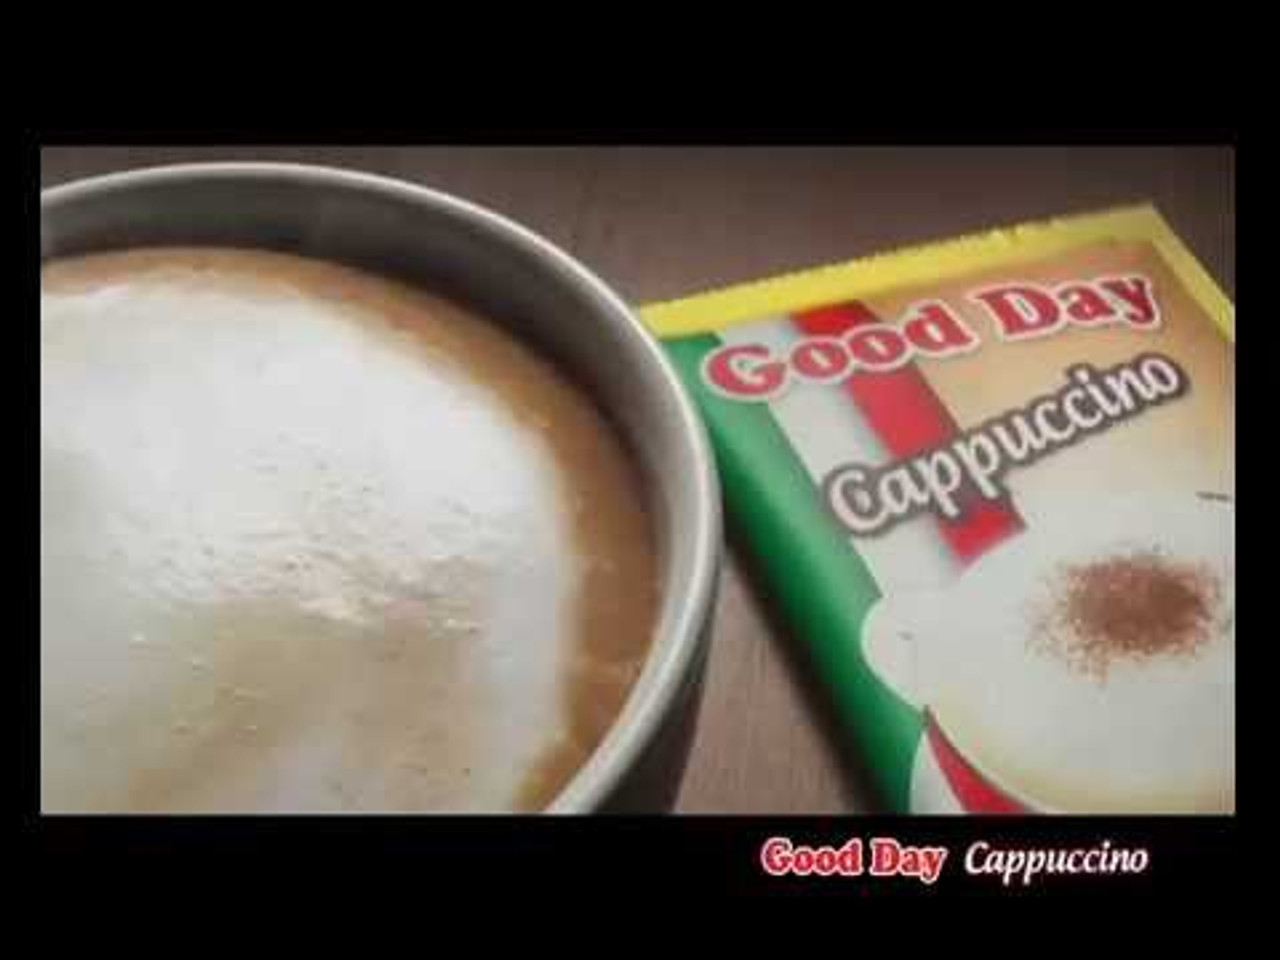 Good Day Cappuccino with Chocolate Granule Instant Coffee Box 125 Gram (4.40 Oz) 5-ct @ 25 Gram